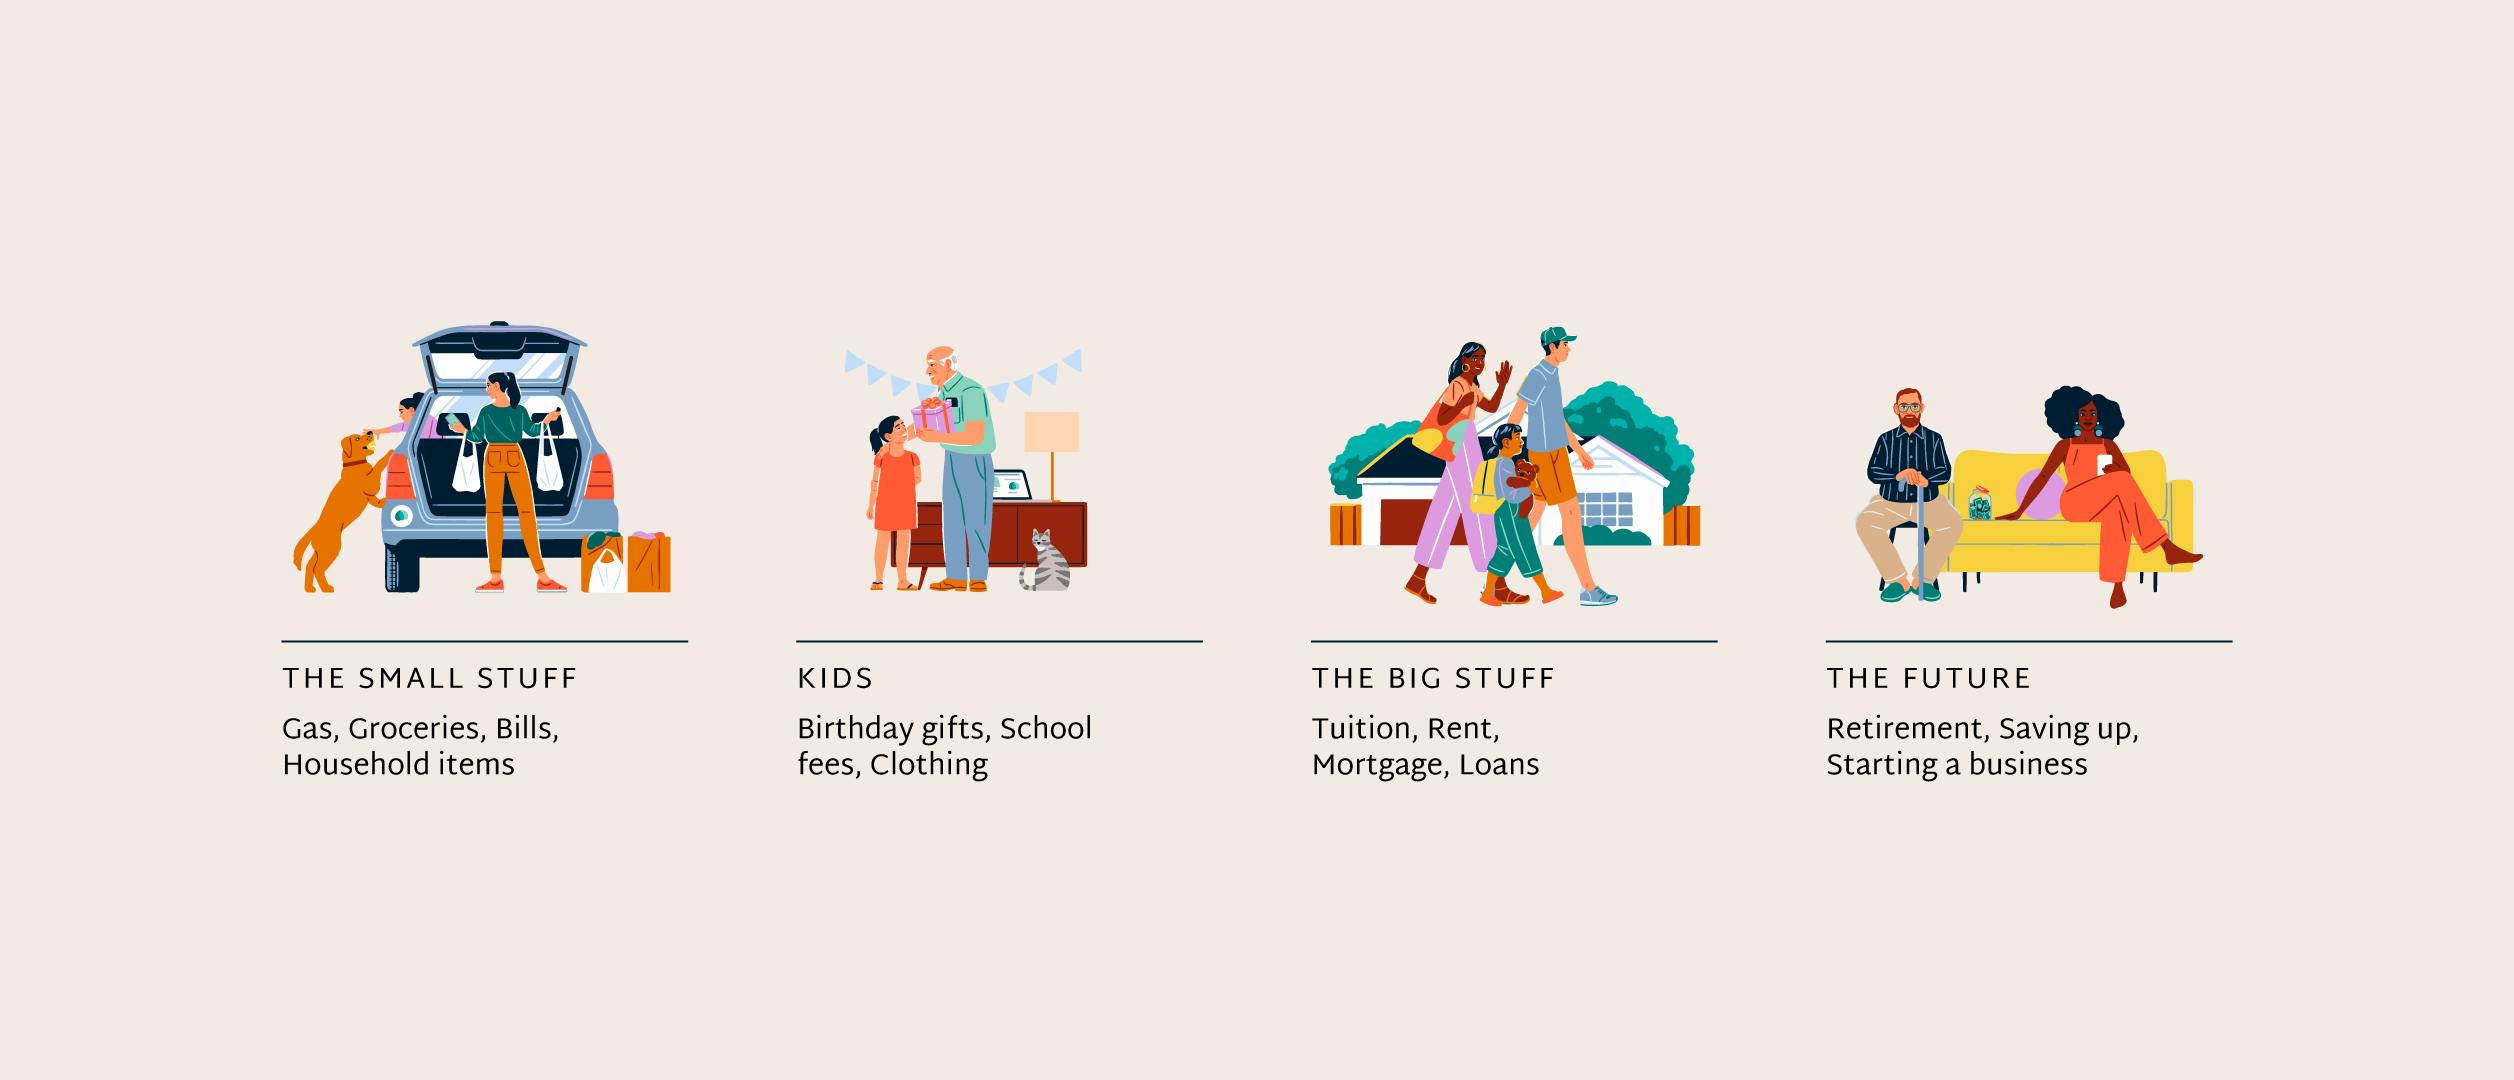 Illustrations of four groups of people with text below highlighting different things you could save money before. Categories are "The small stuff," "Kids," "The Big Stuff," The Future."